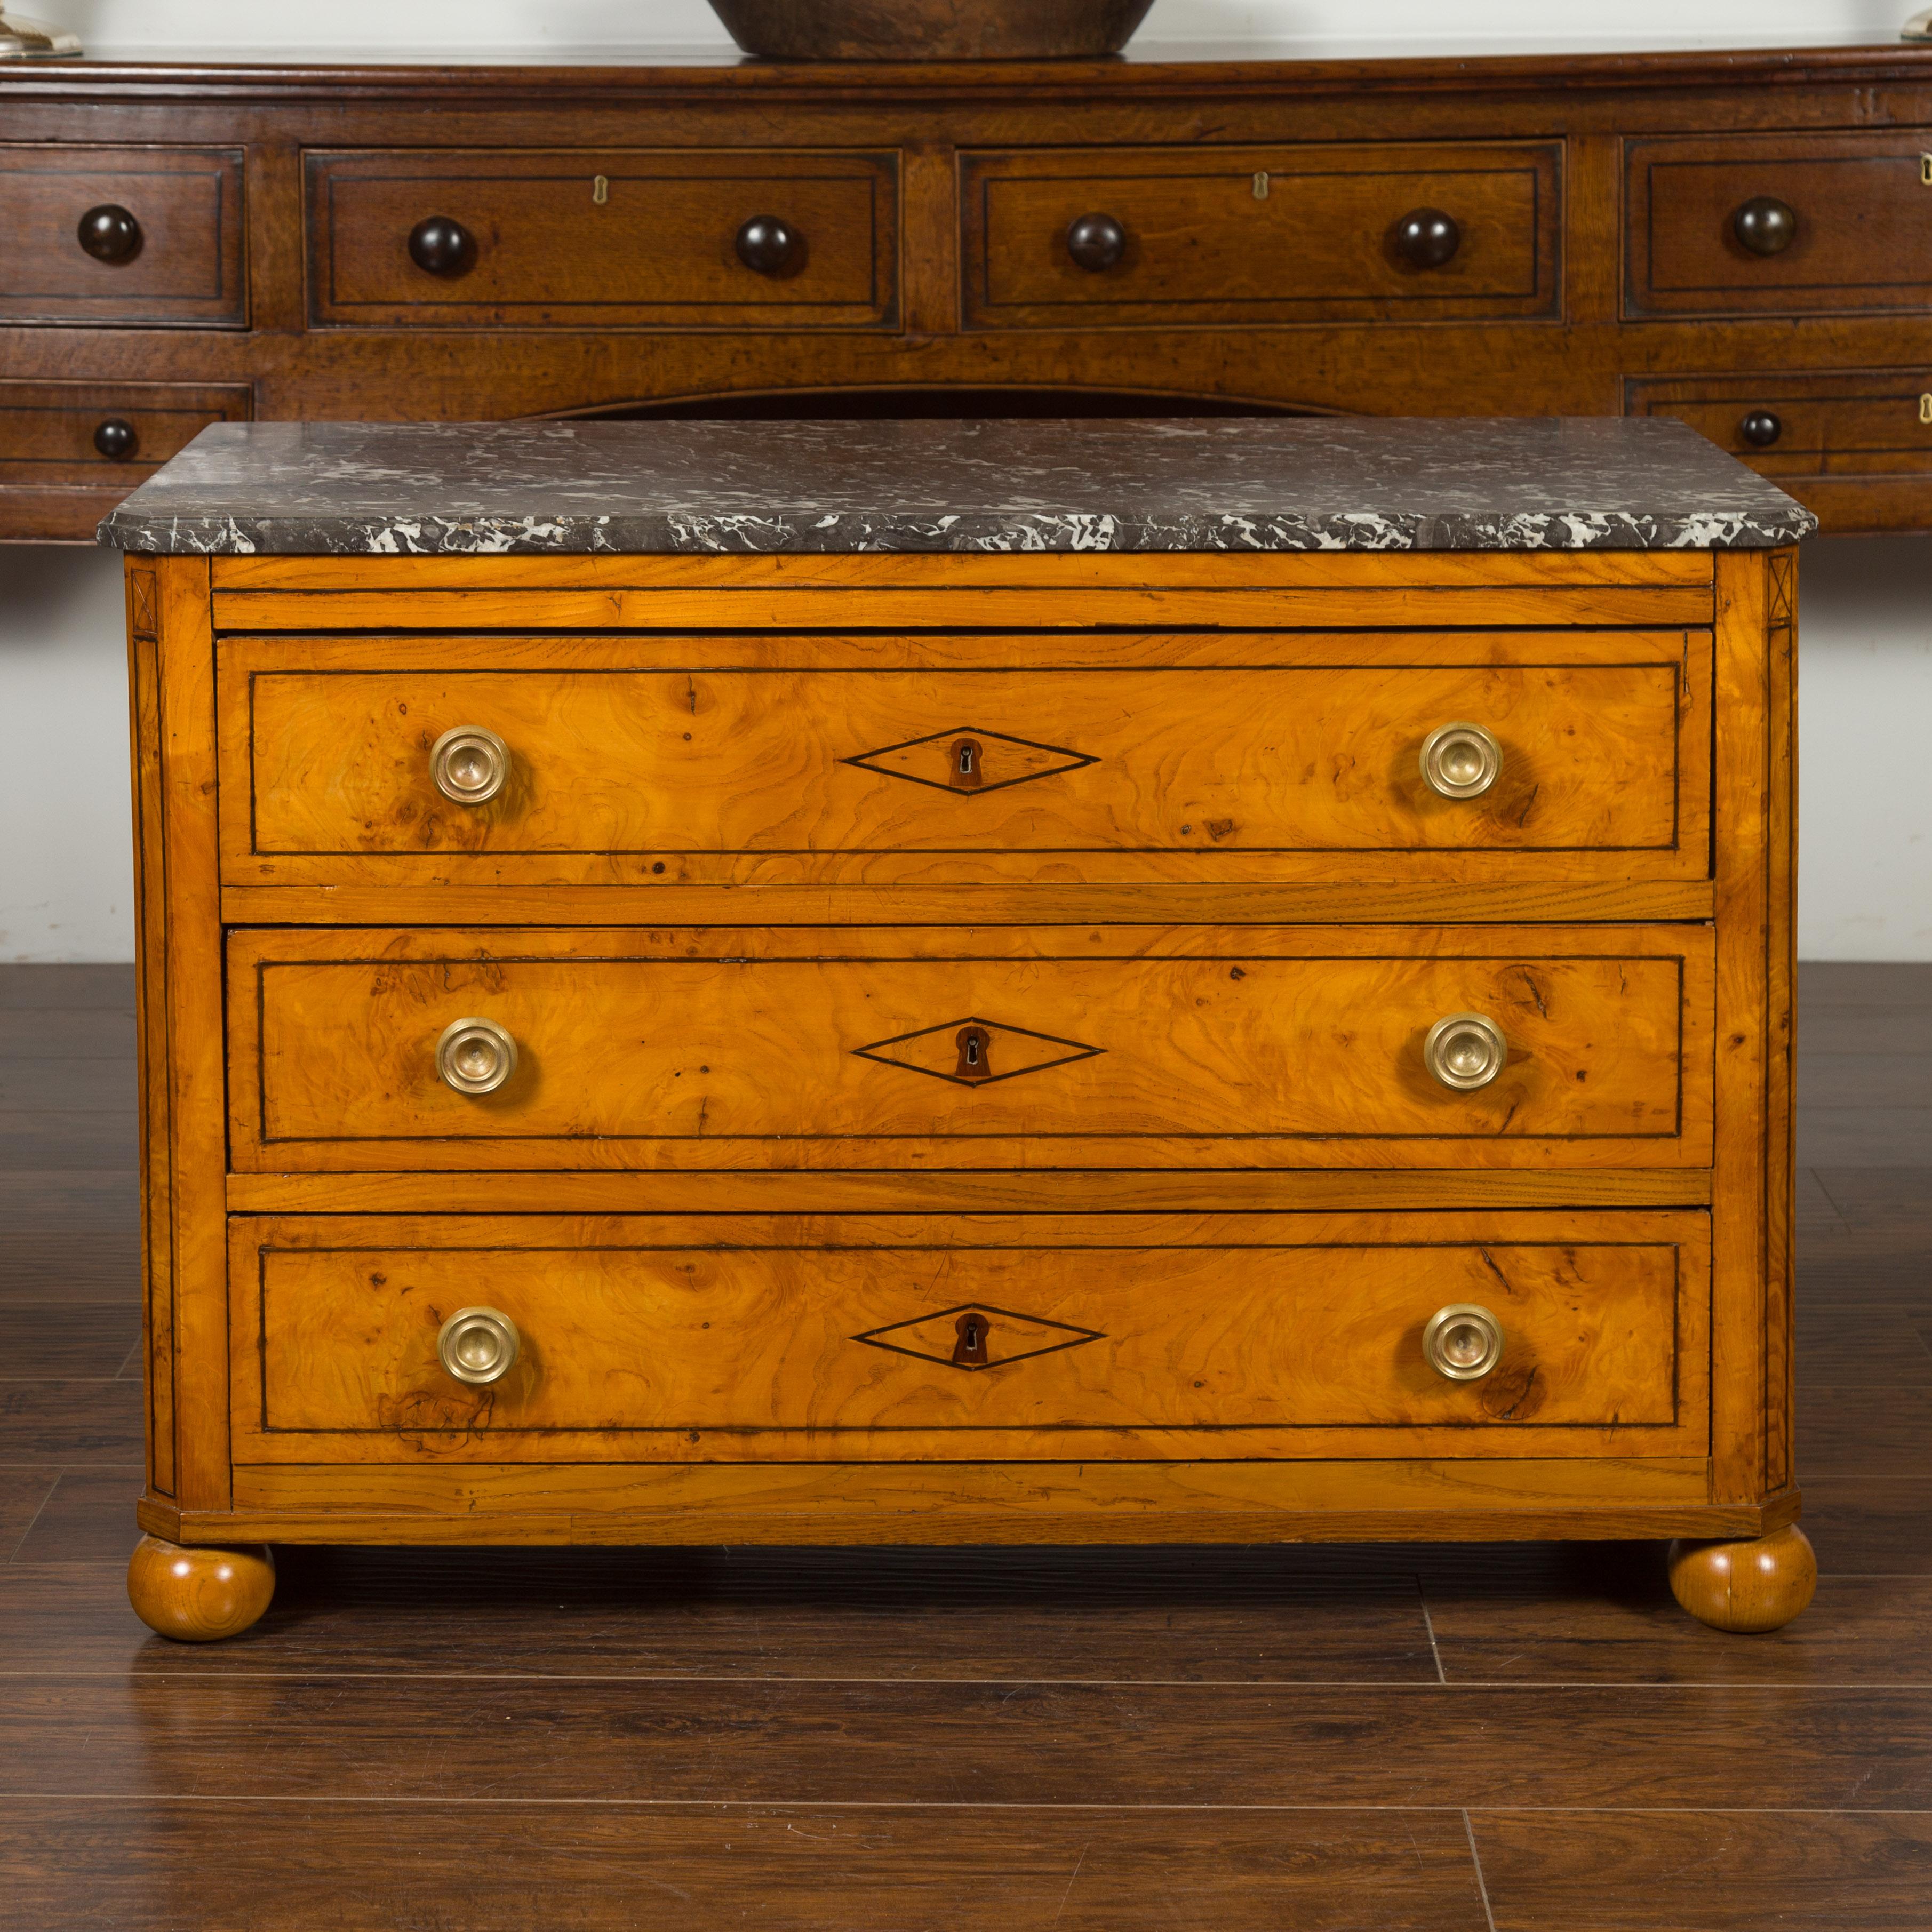 A Biedermeier period walnut three-drawer commode from the mid-19th century, with grey marble top and banding. Created in Austria during the first half of the 19th century, this walnut commode features a rectangular variegated grey marble top with